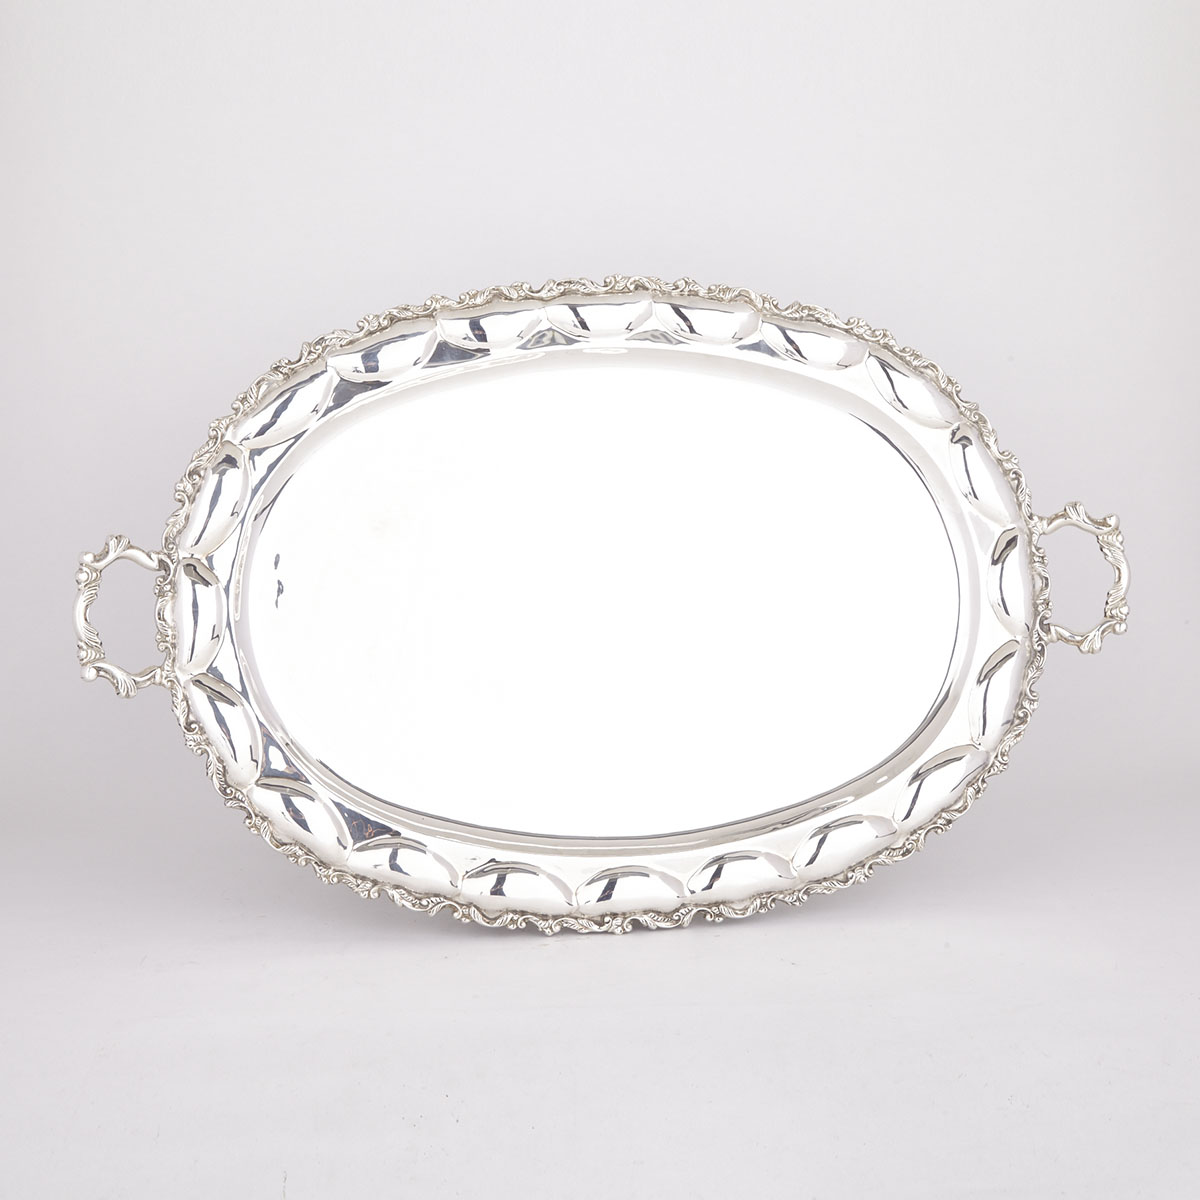 Mexican Silver Two-Handled Serving Tray, mid-20th century